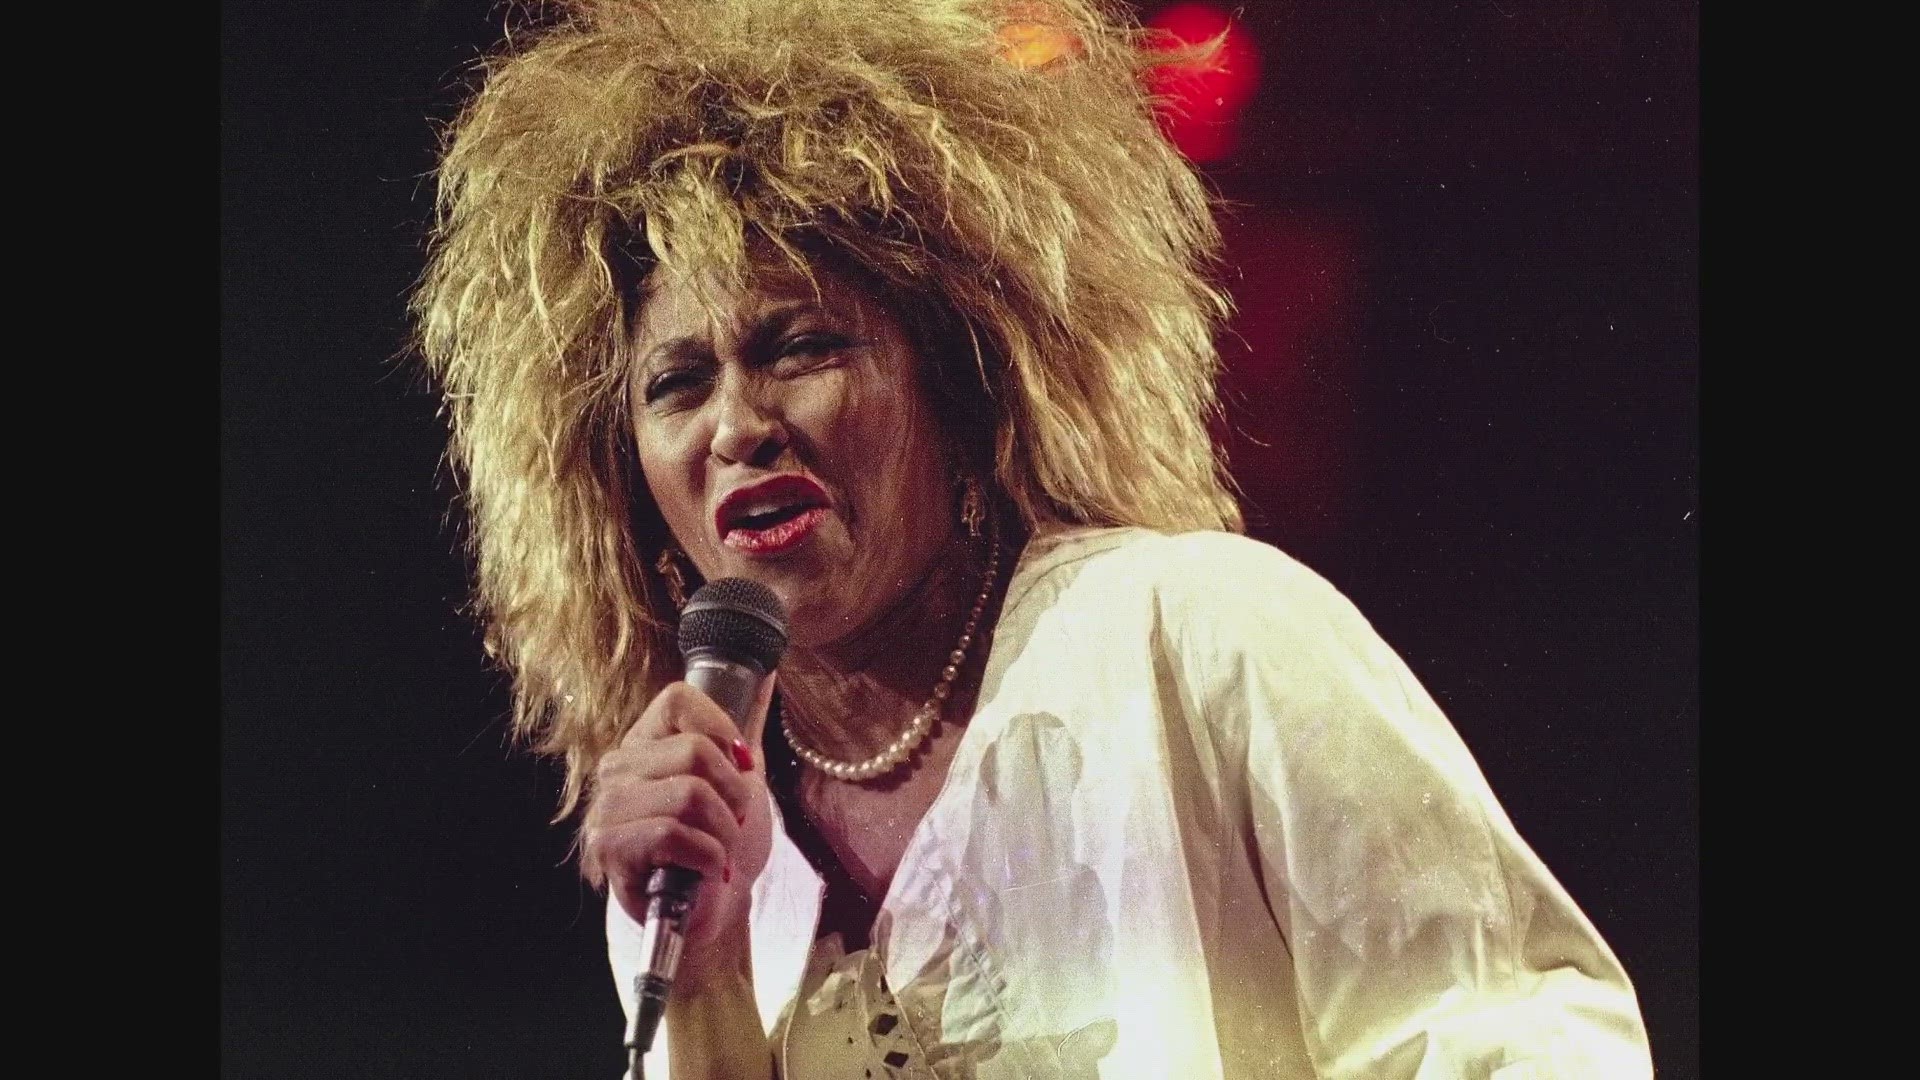 The National Blues Museum celebrates the foundations of modern music. It’s why Wednesday’s news of Tina Turner's death struck a chord.